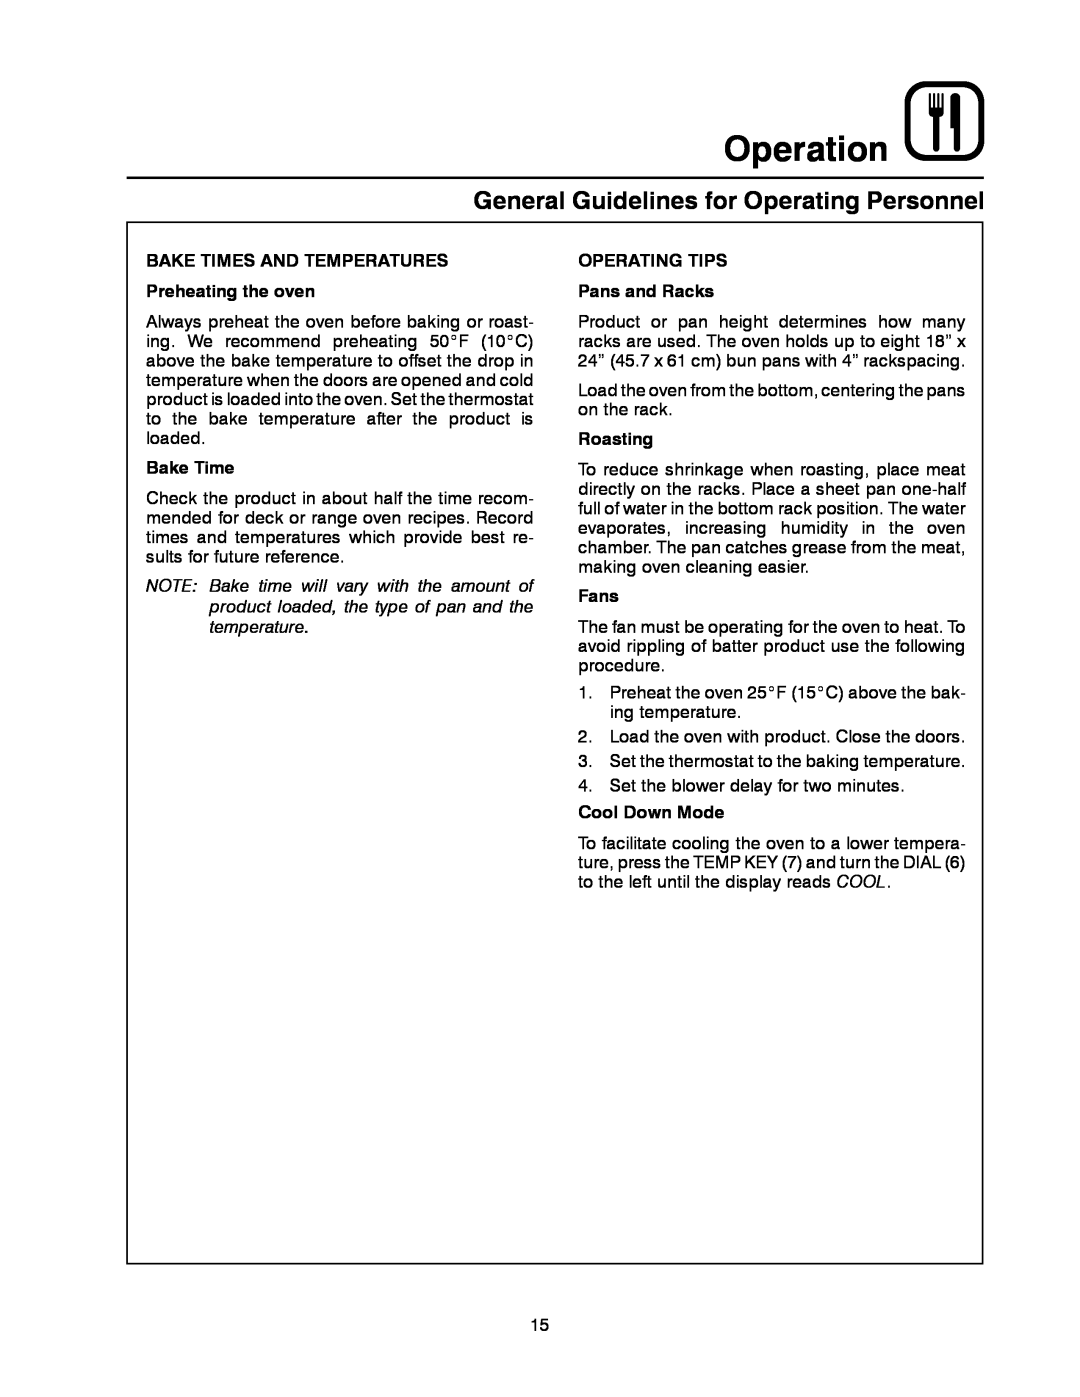 Blodgett XR8-G General Guidelines for Operating Personnel, Operation, BAKE TIMES AND TEMPERATURES Preheating the oven 